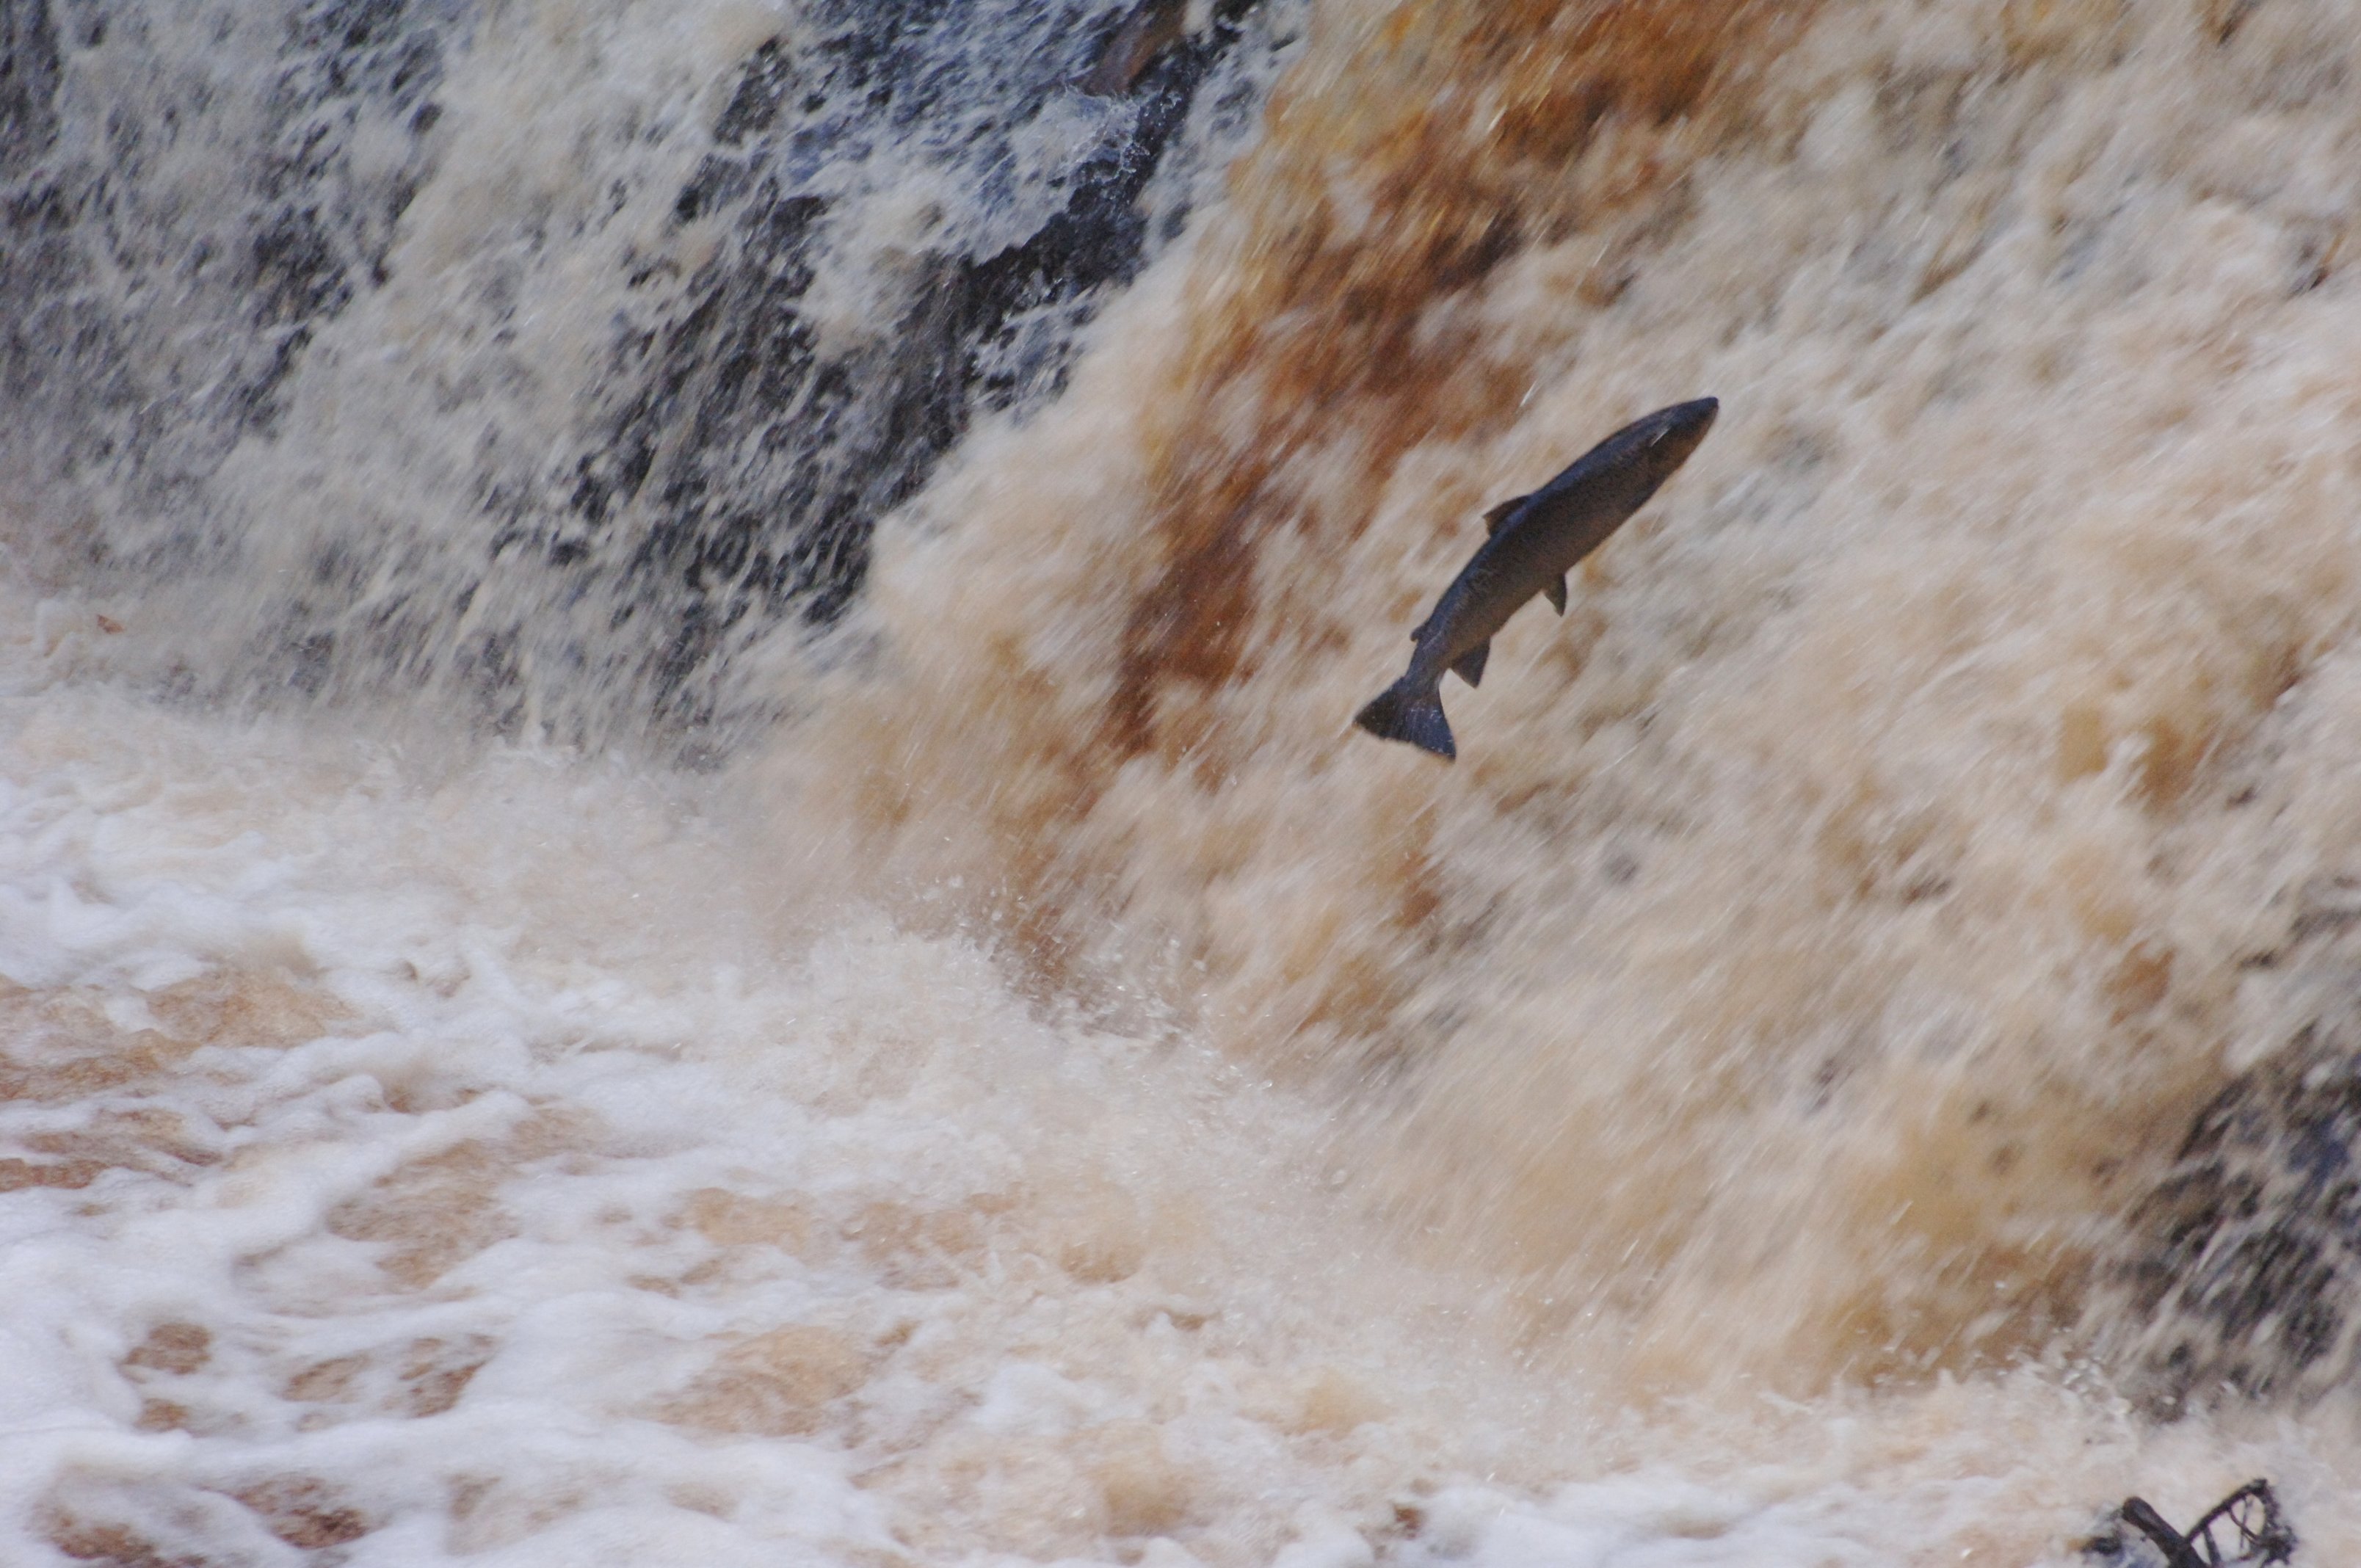 A salmon jumping during spawning 